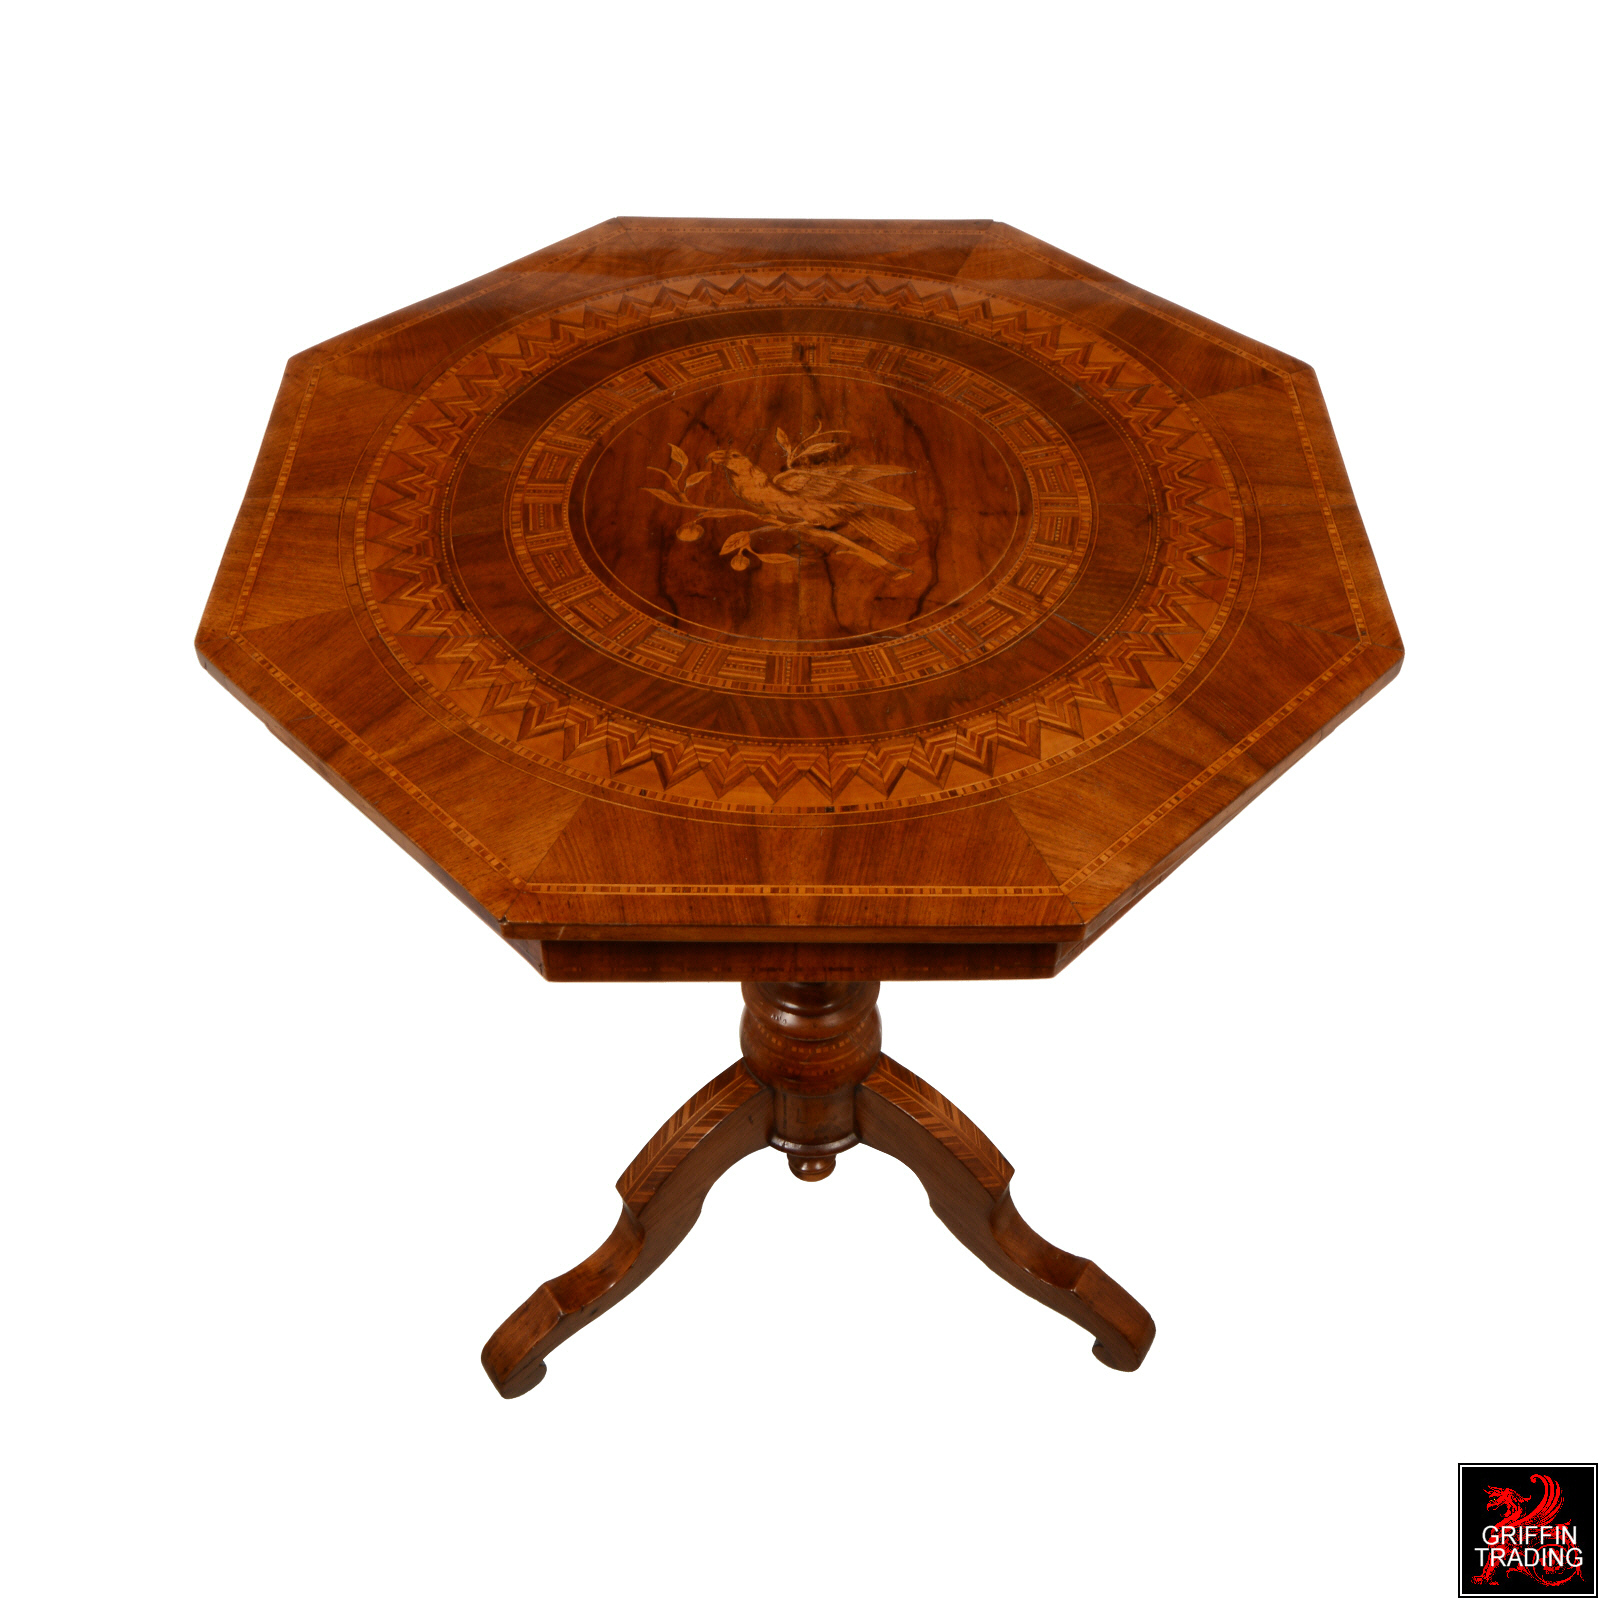 Antique 19th Century Italian side table with wood marquetry inlay.